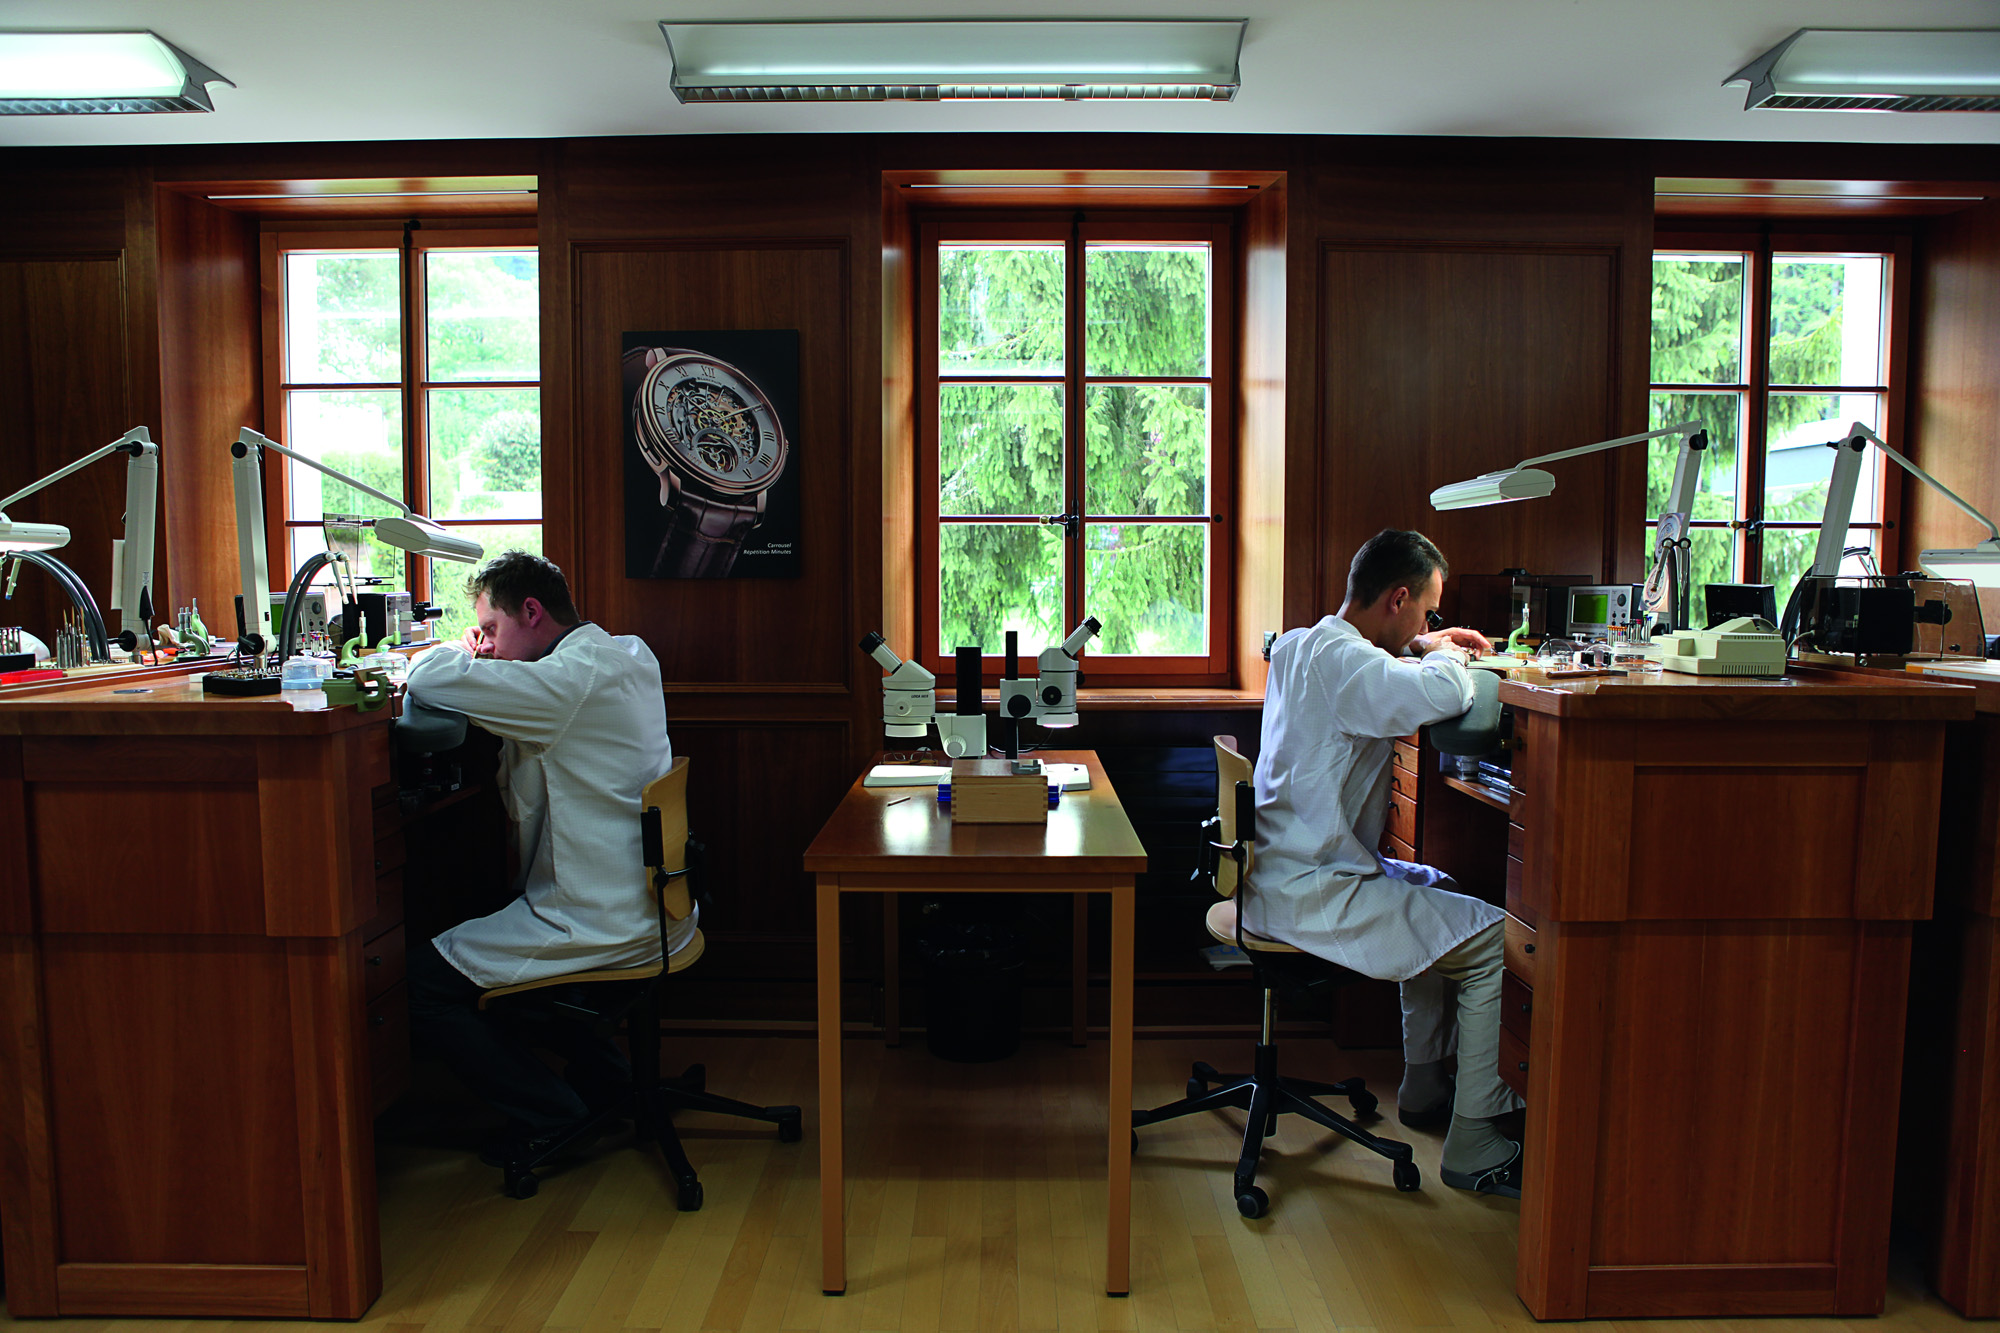 blancpain-manufacture-atelier-repetition-minutes.jpg